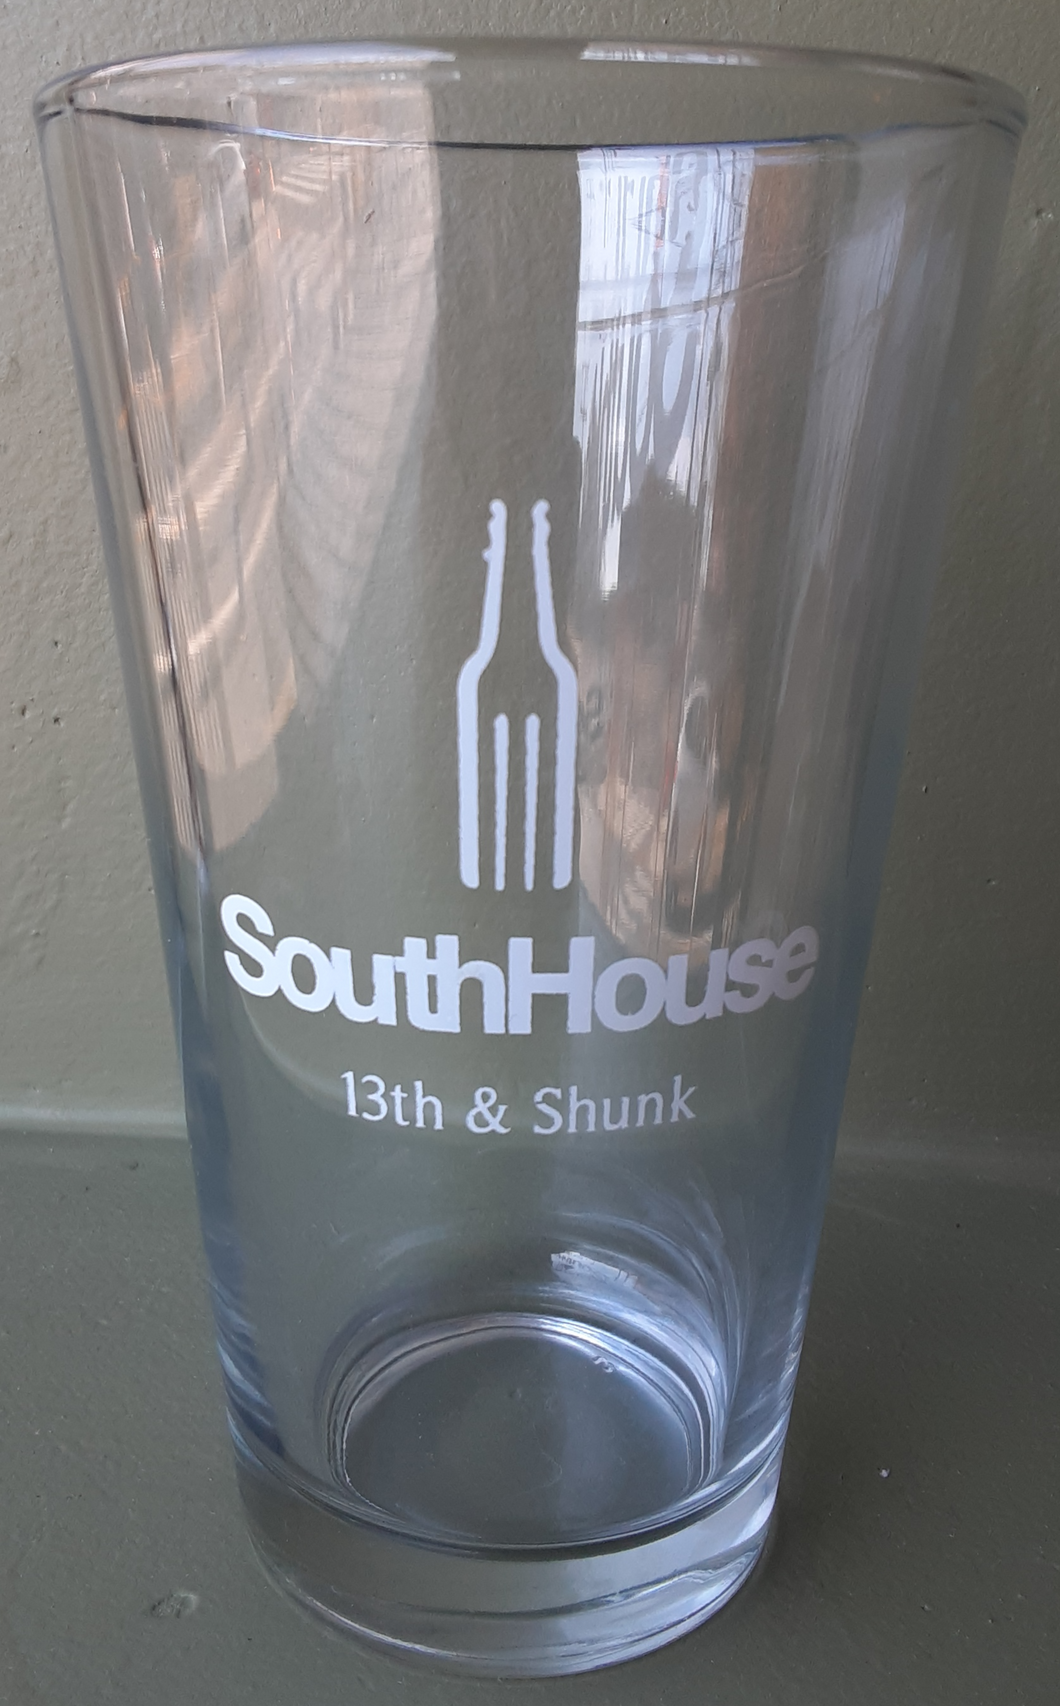 SouthHouse branded 16 ounce pint glass.